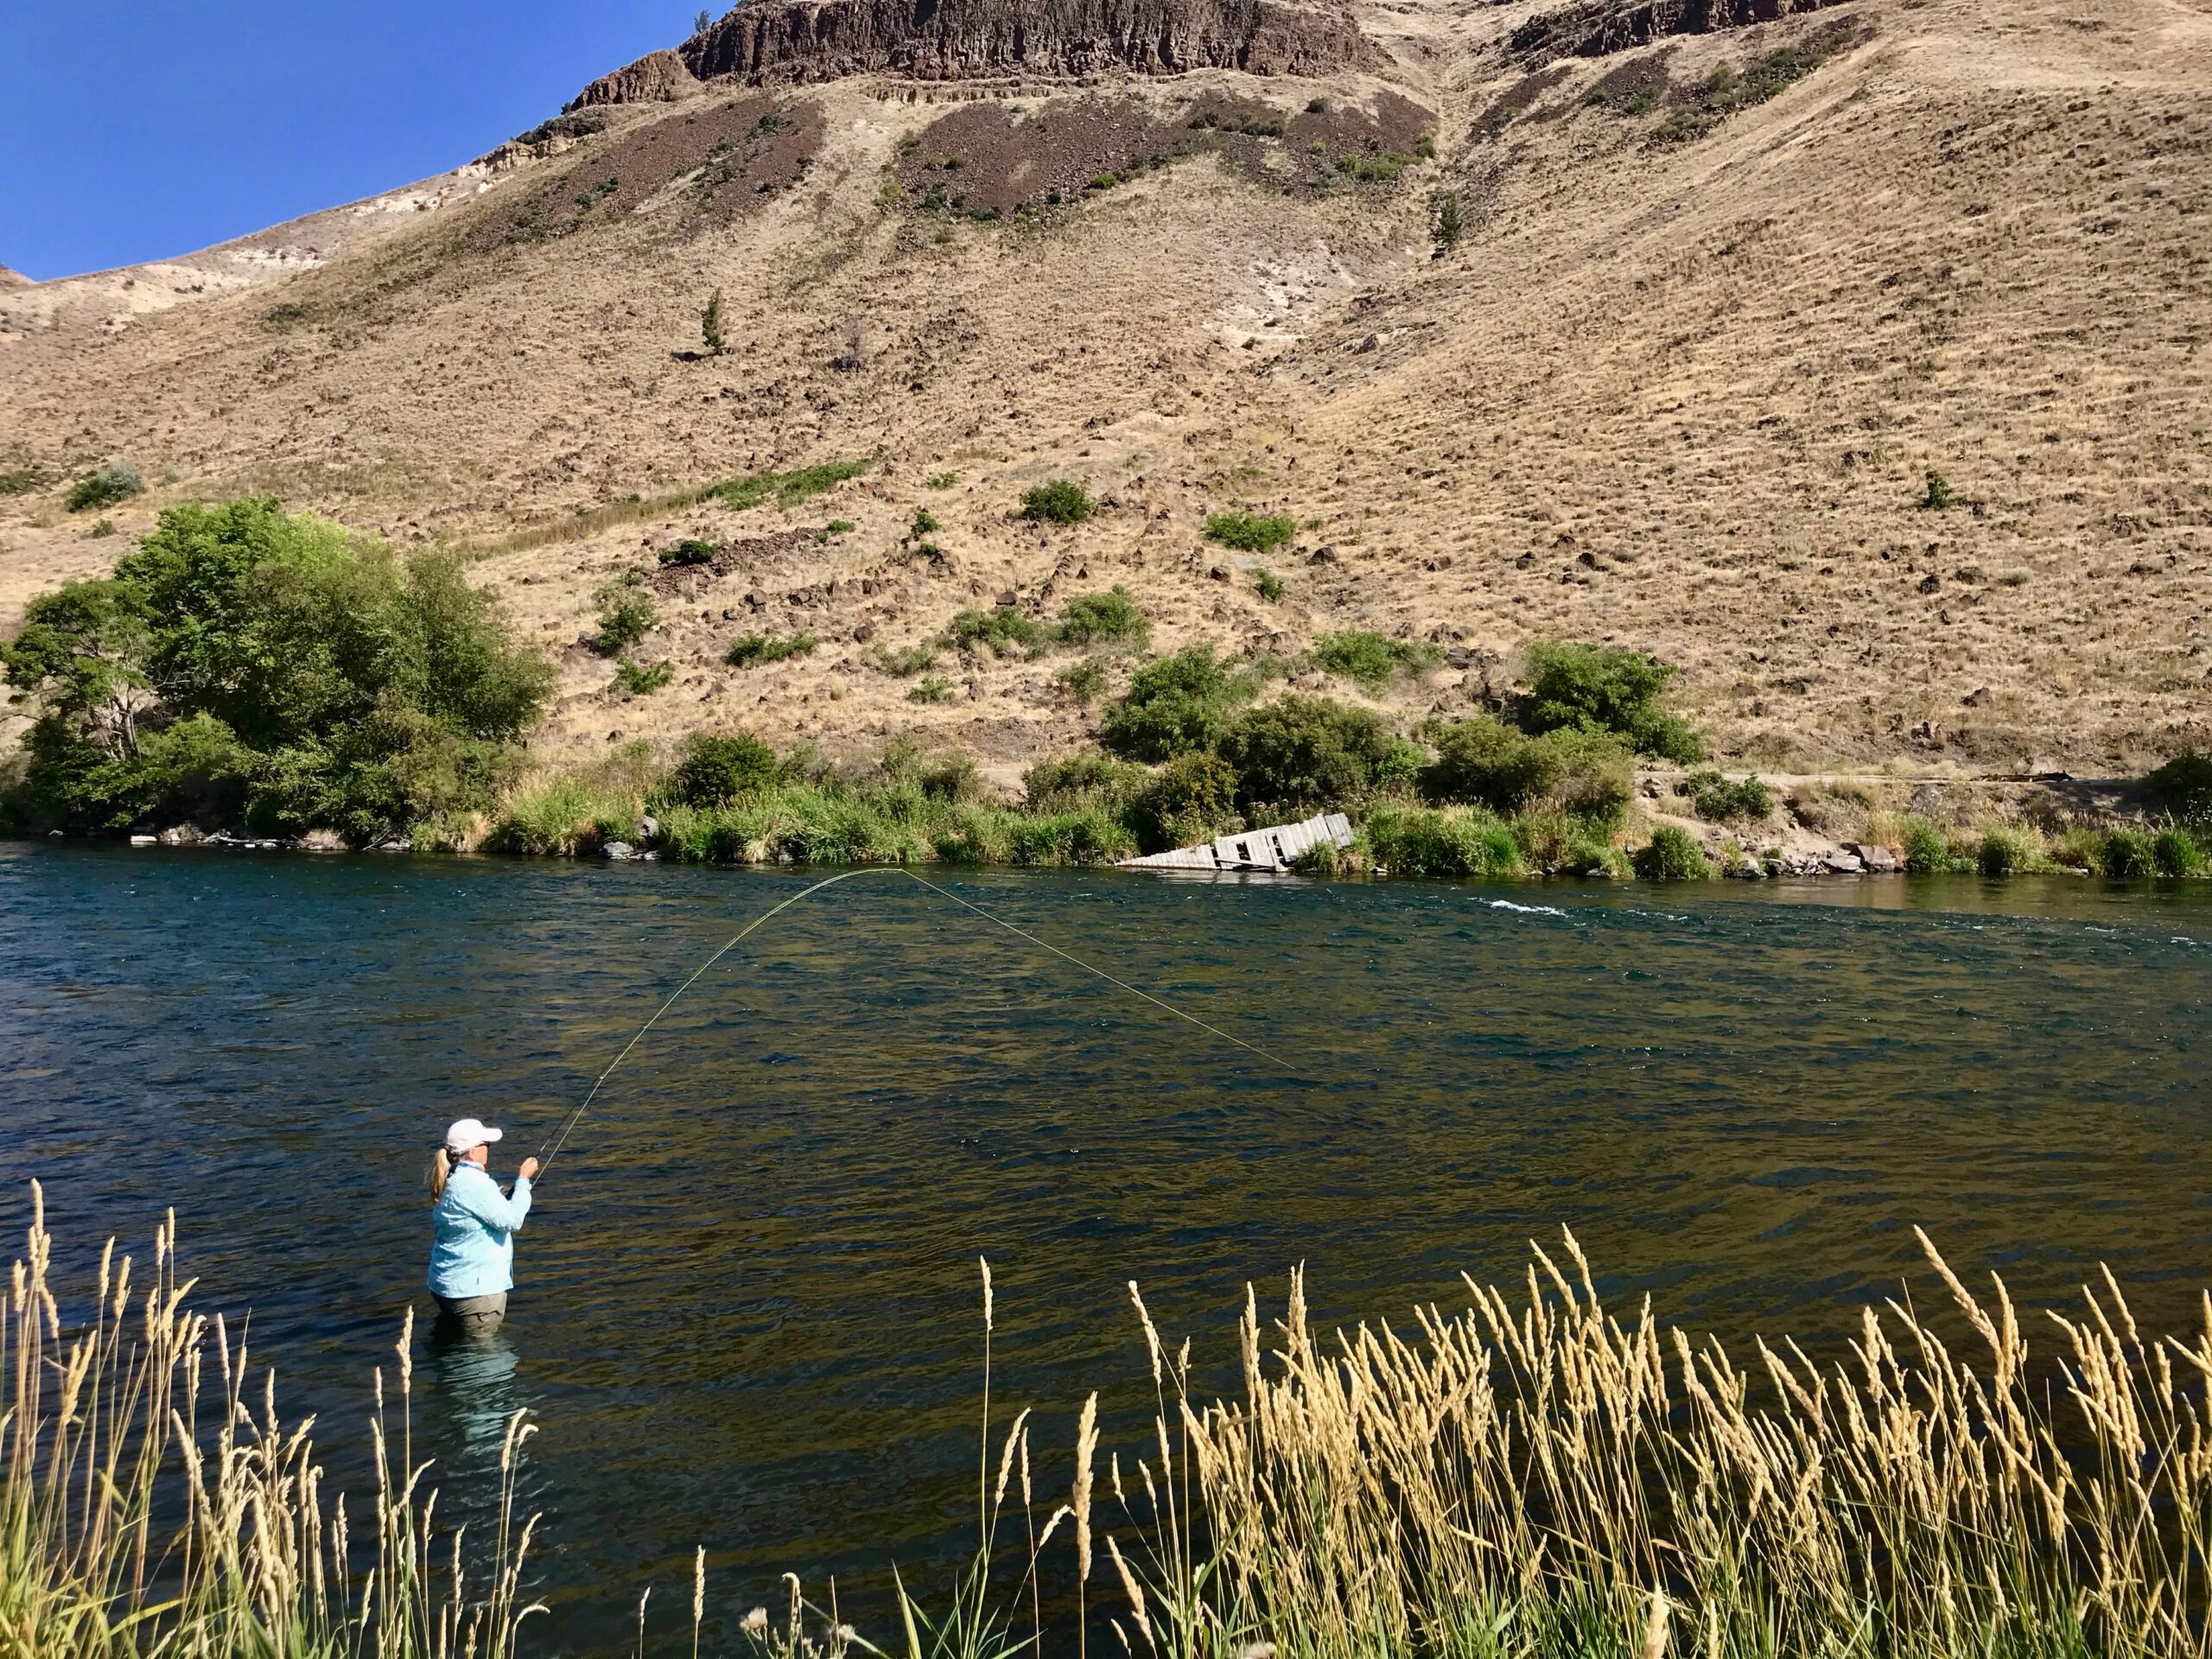 Lower Deschutes River Guided Fly Fishing Griff Marshall Outdoors